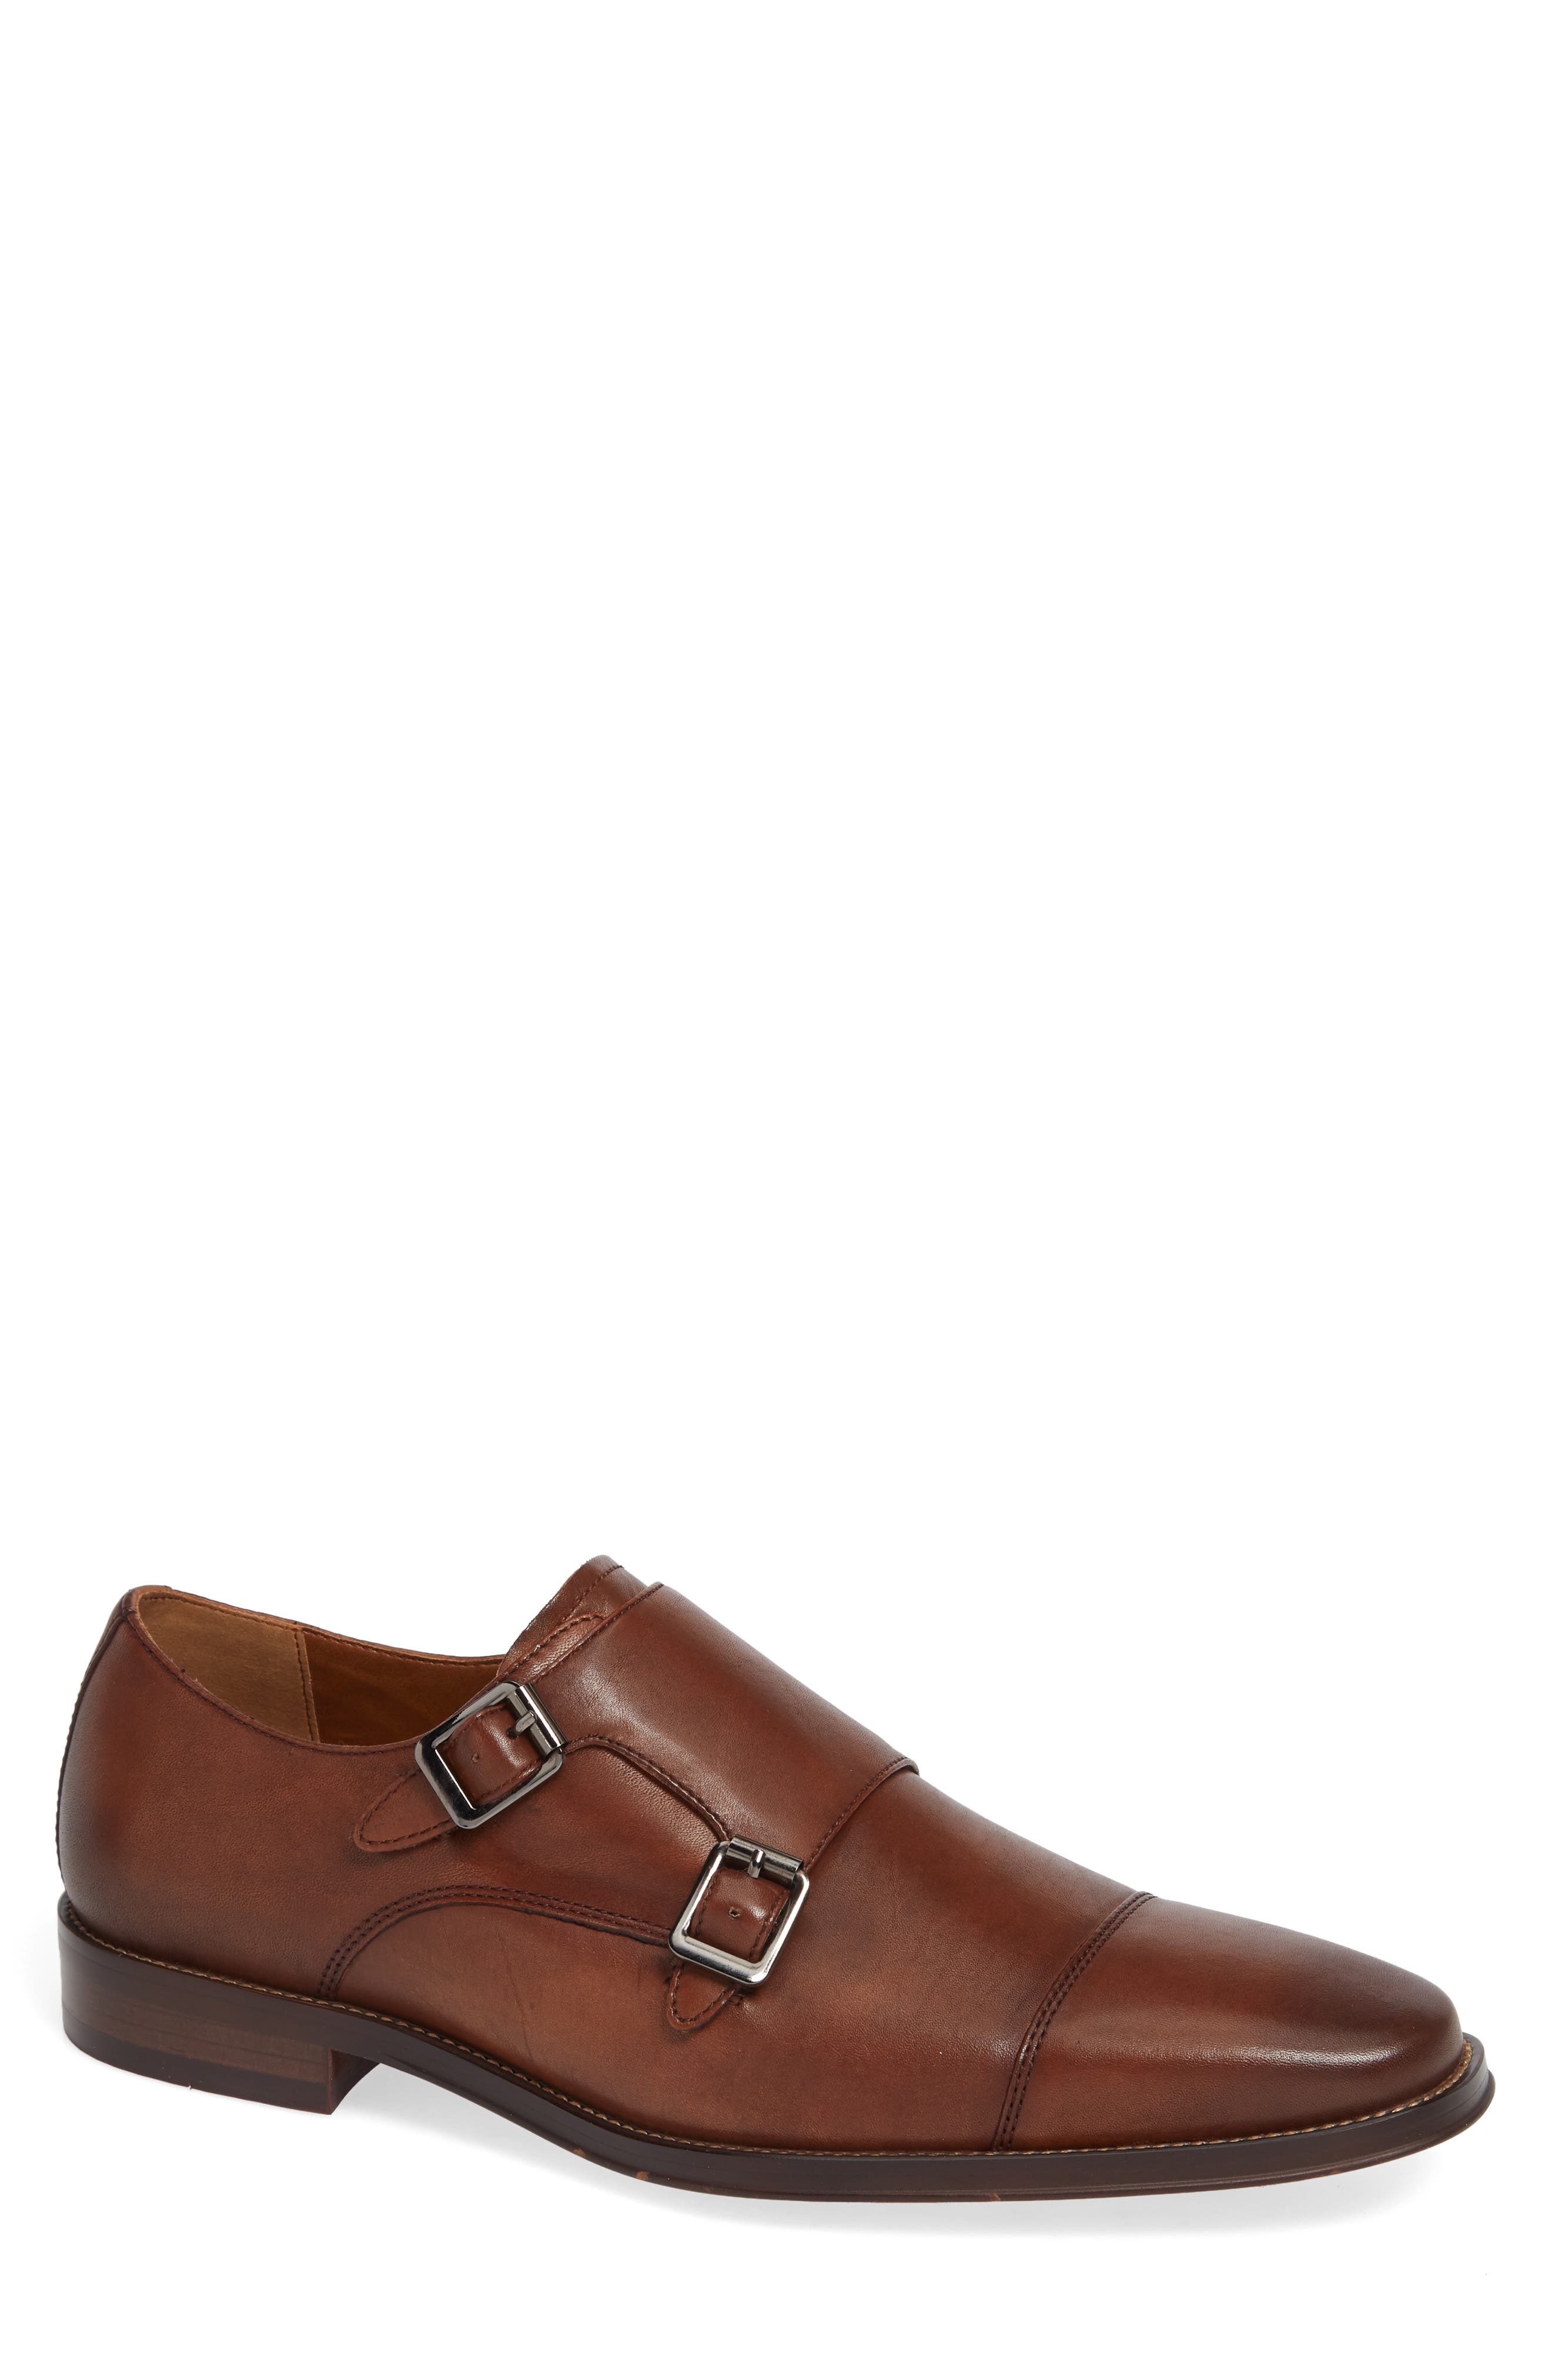 burberry mens shoes nordstrom